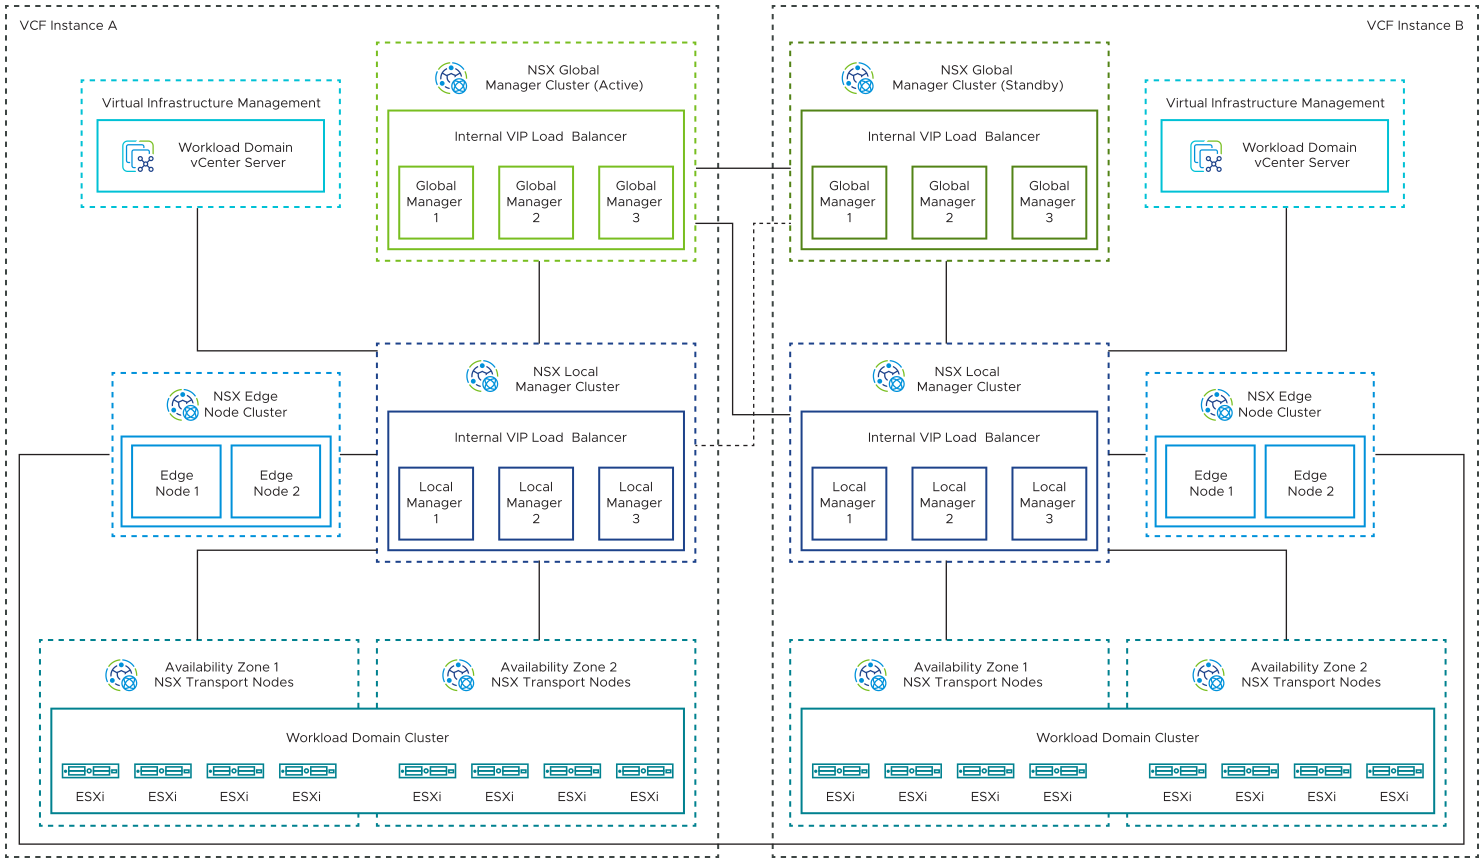 The Global Manager cluster in instance A is active, and the Global Manager cluster in instance B is standby. Both Global Manager clusters are connected to the Local Manager clusters in each VMware Cloud Foundation instance. Each Local Manager cluster is connected to its corresponding edge cluster and the ESXi hosts distributed in two availability zones.